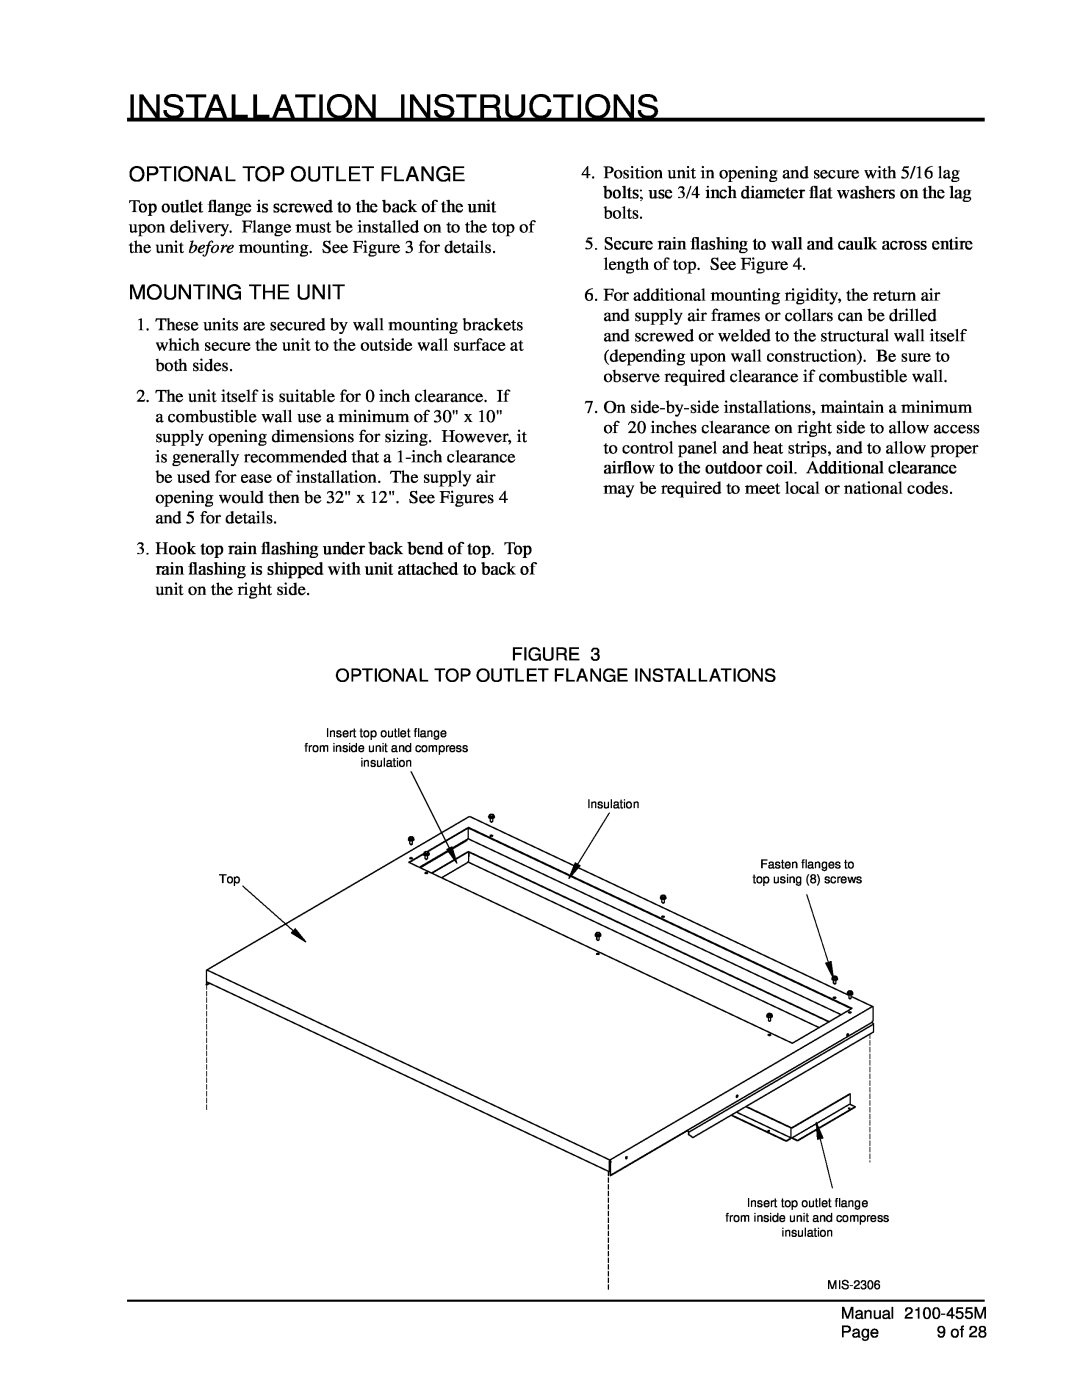 Bard CH4S1, CH5S1, CH3S1 installation instructions Installation Instructions, OPTiOnal top outlet flange, Mounting The Unit 